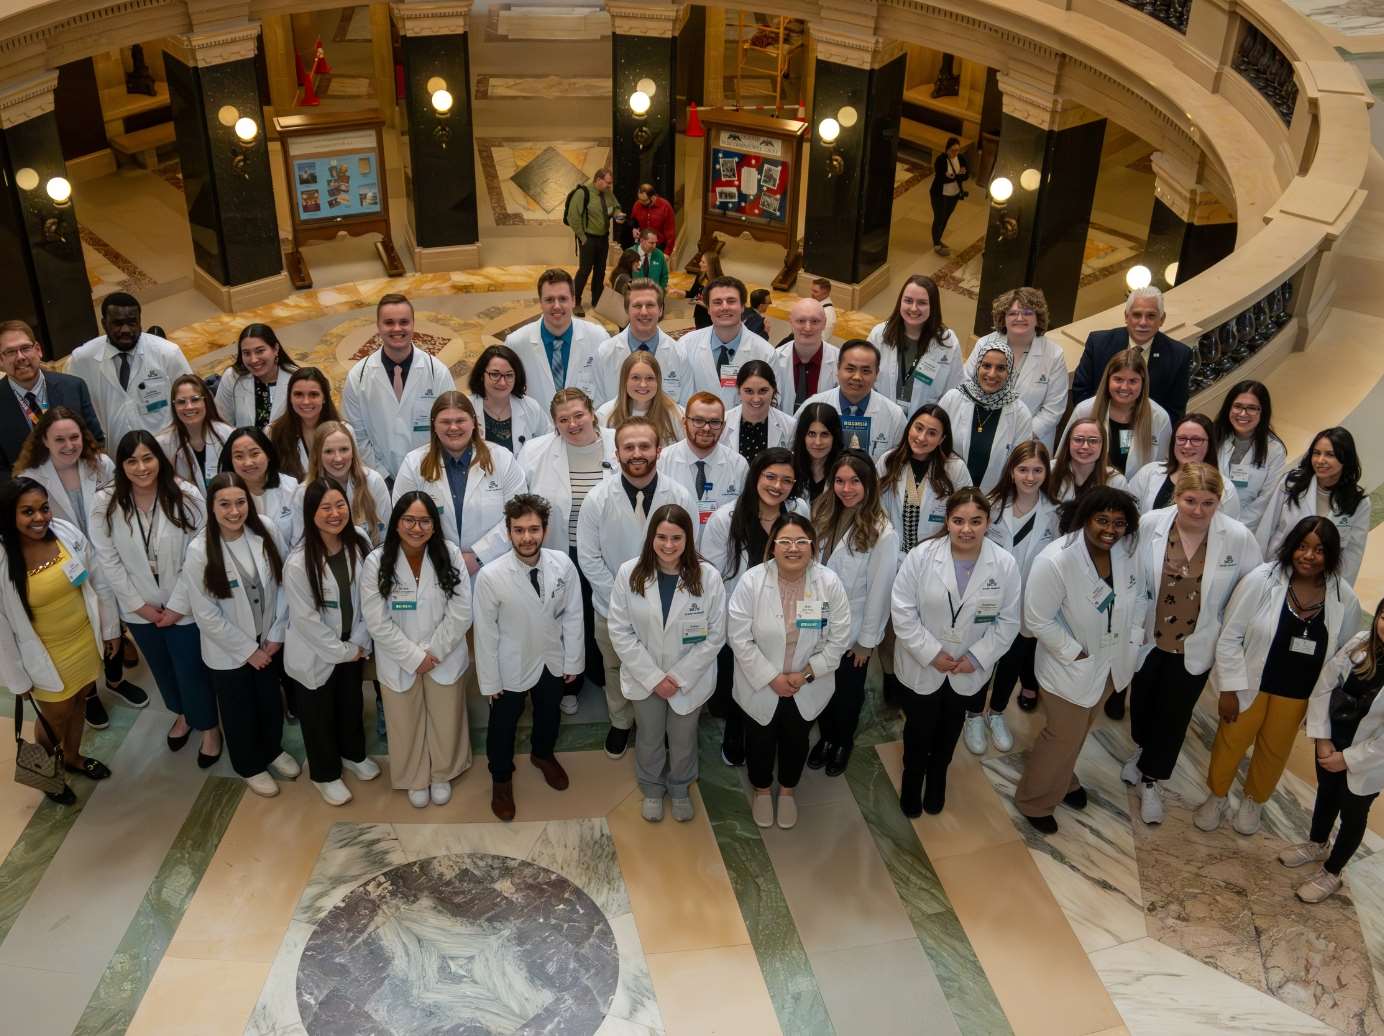 ӰԺ pharmacy students advocate for pharmacy policy efforts at State Capitol